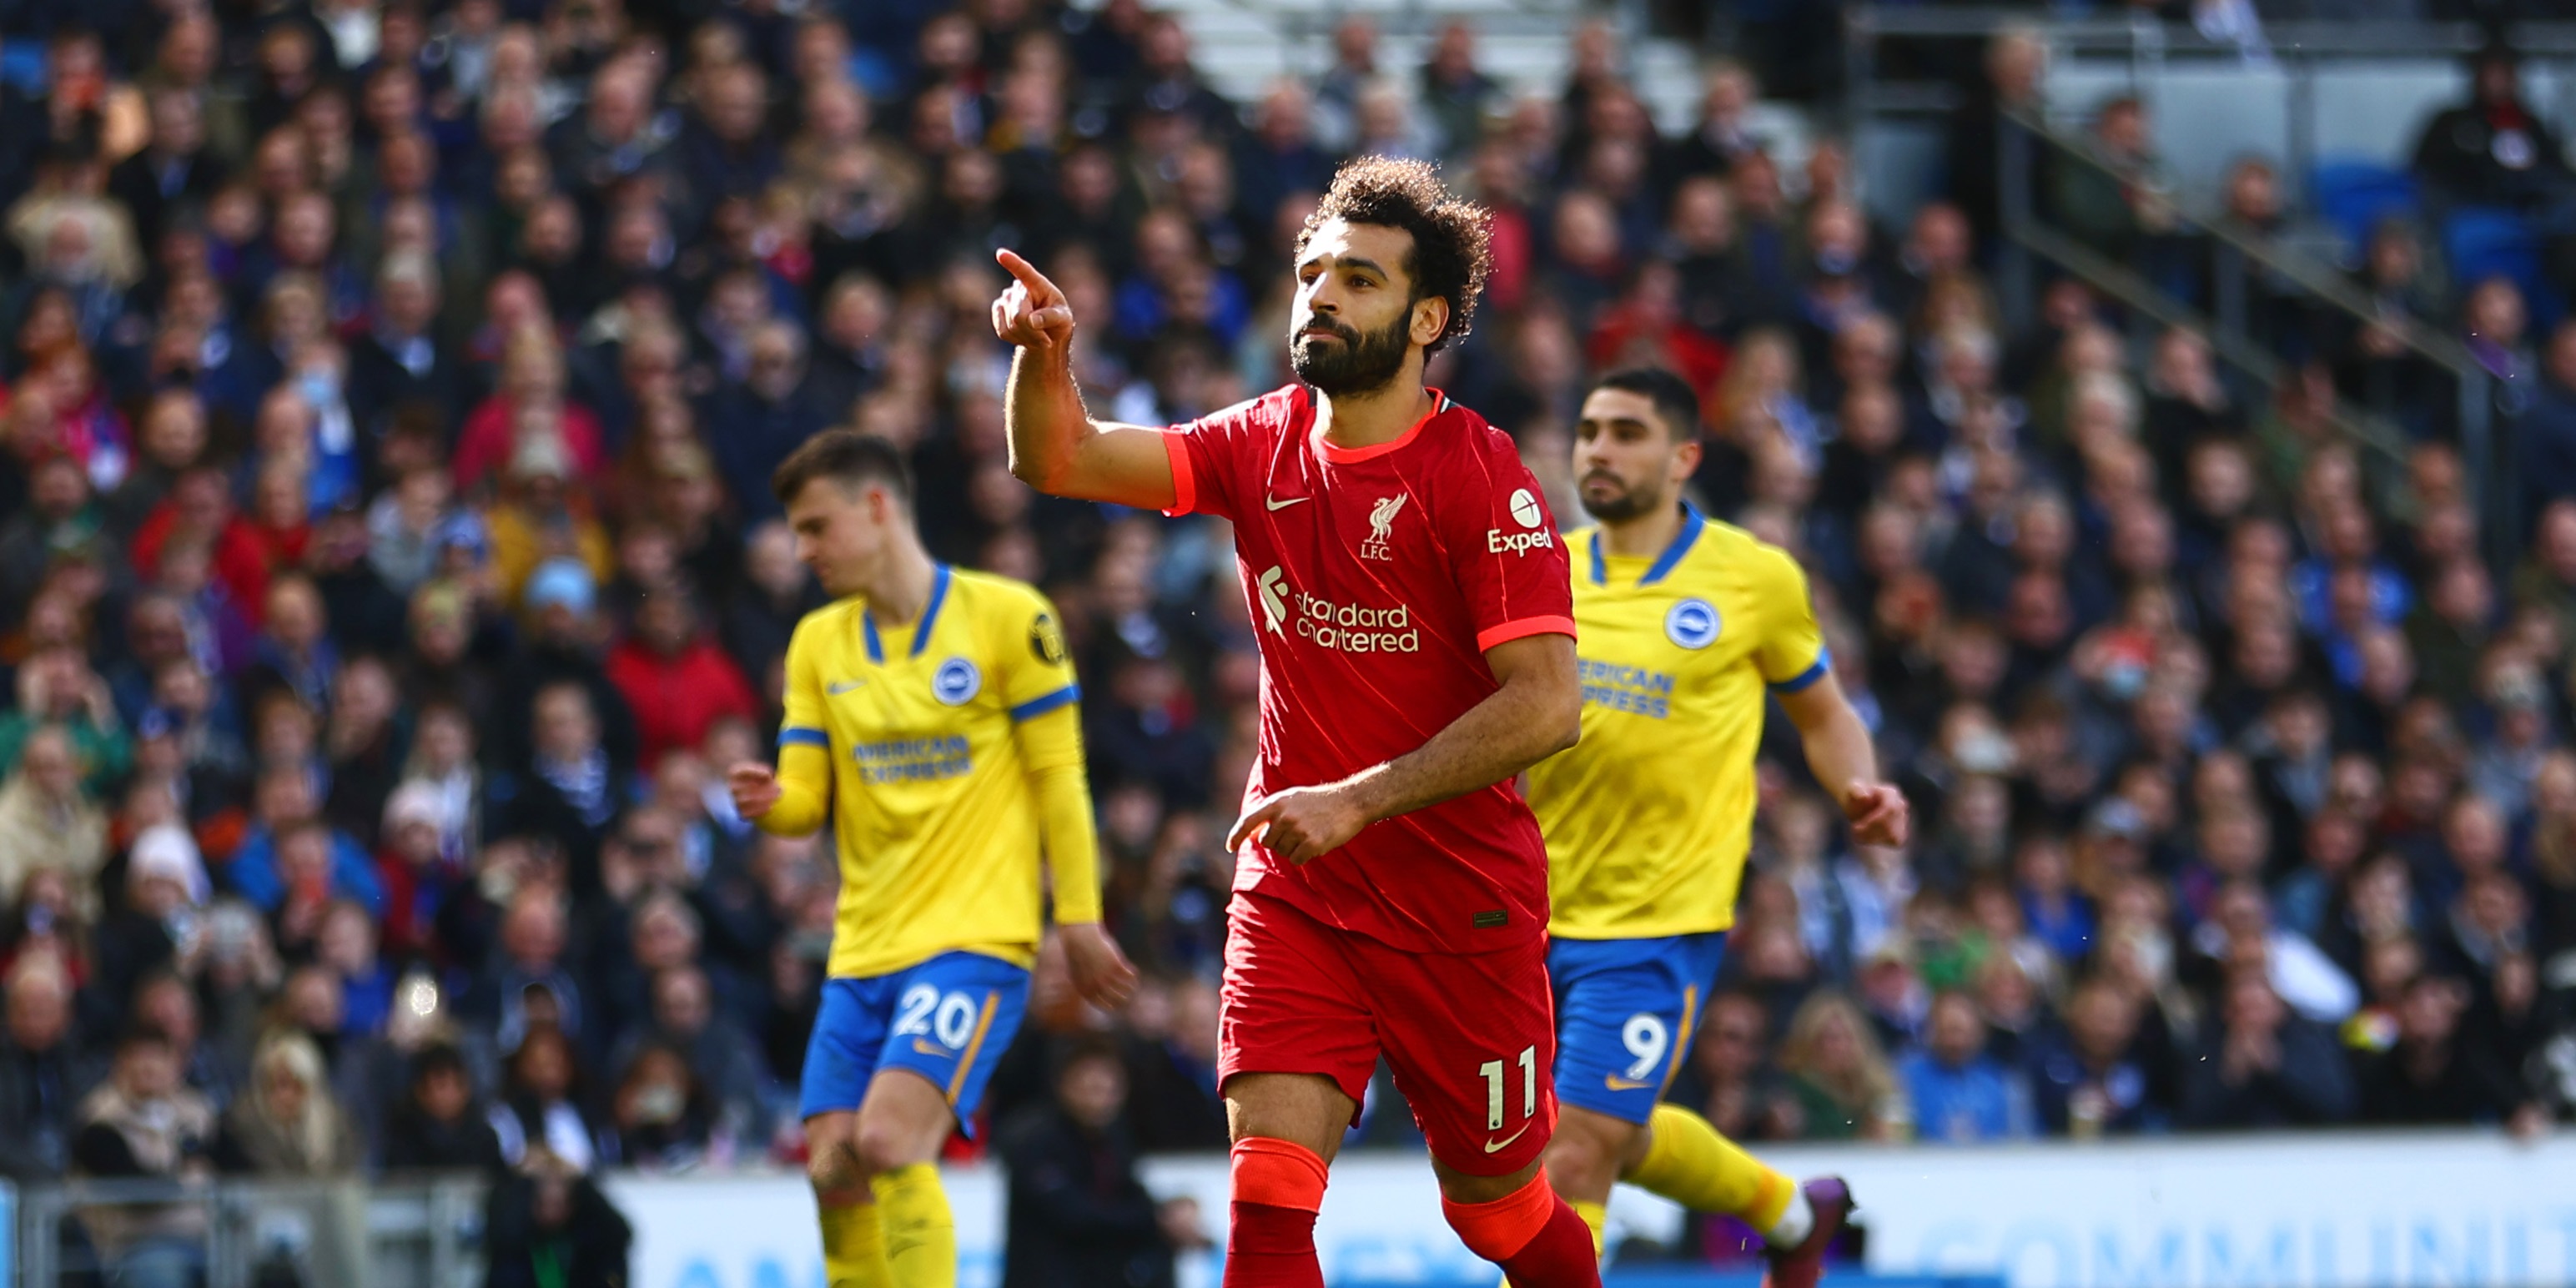 ‘Couldn’t walk properly’ – Klopp shares Salah injury update after 2-0 Liverpool win v Brighton